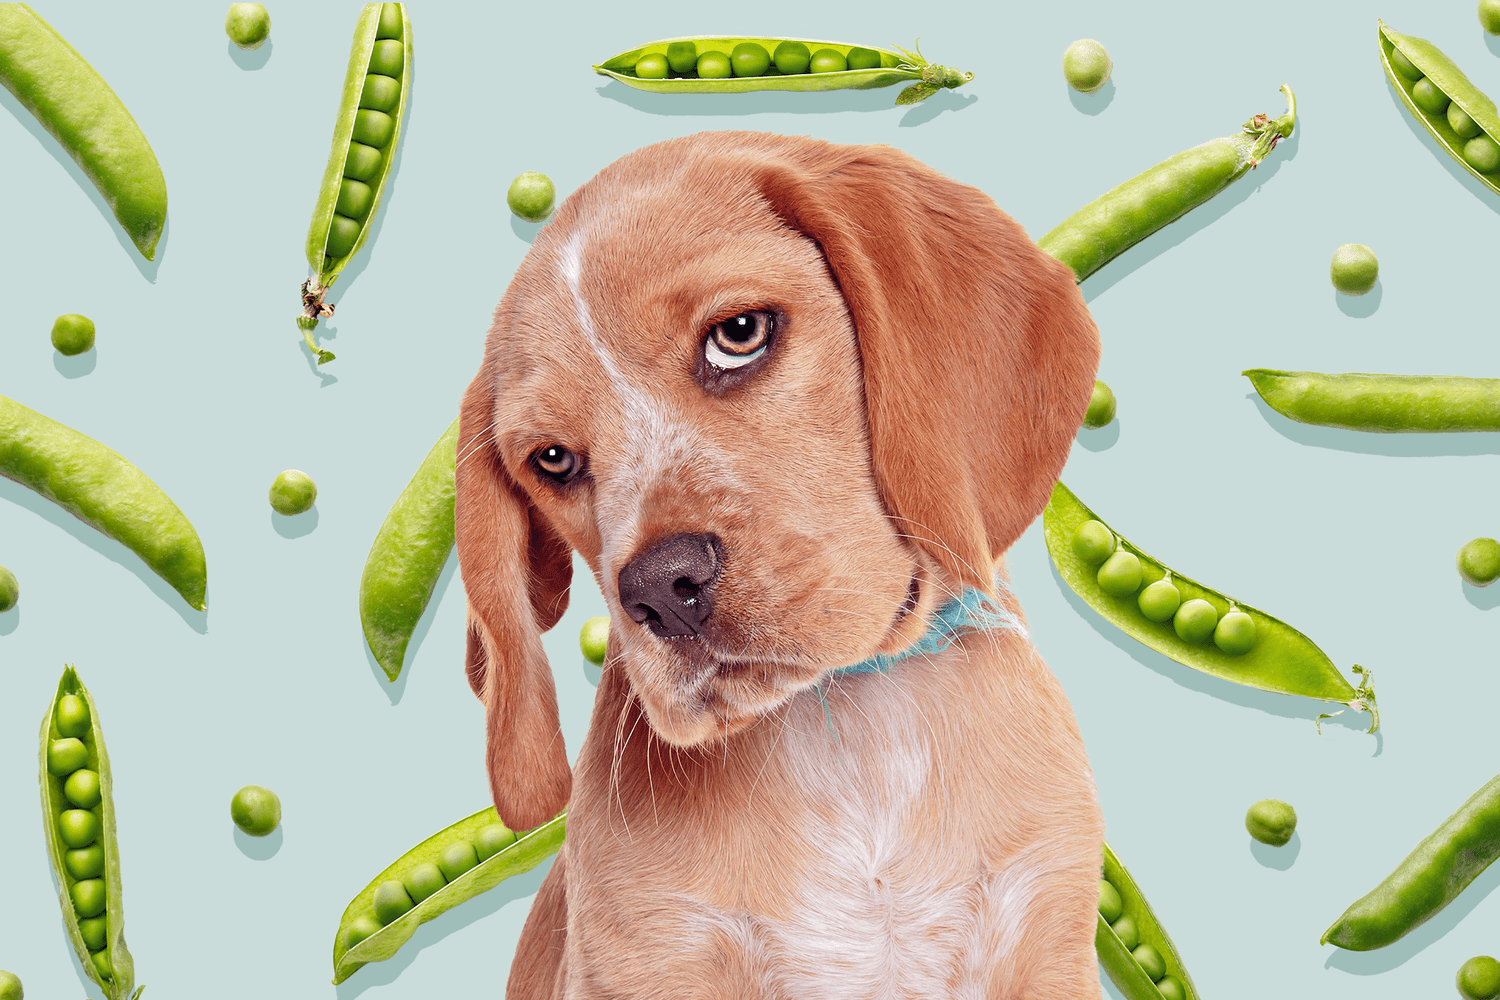 Can Dogs Eat Peas? Here's the Scoop on the Legume